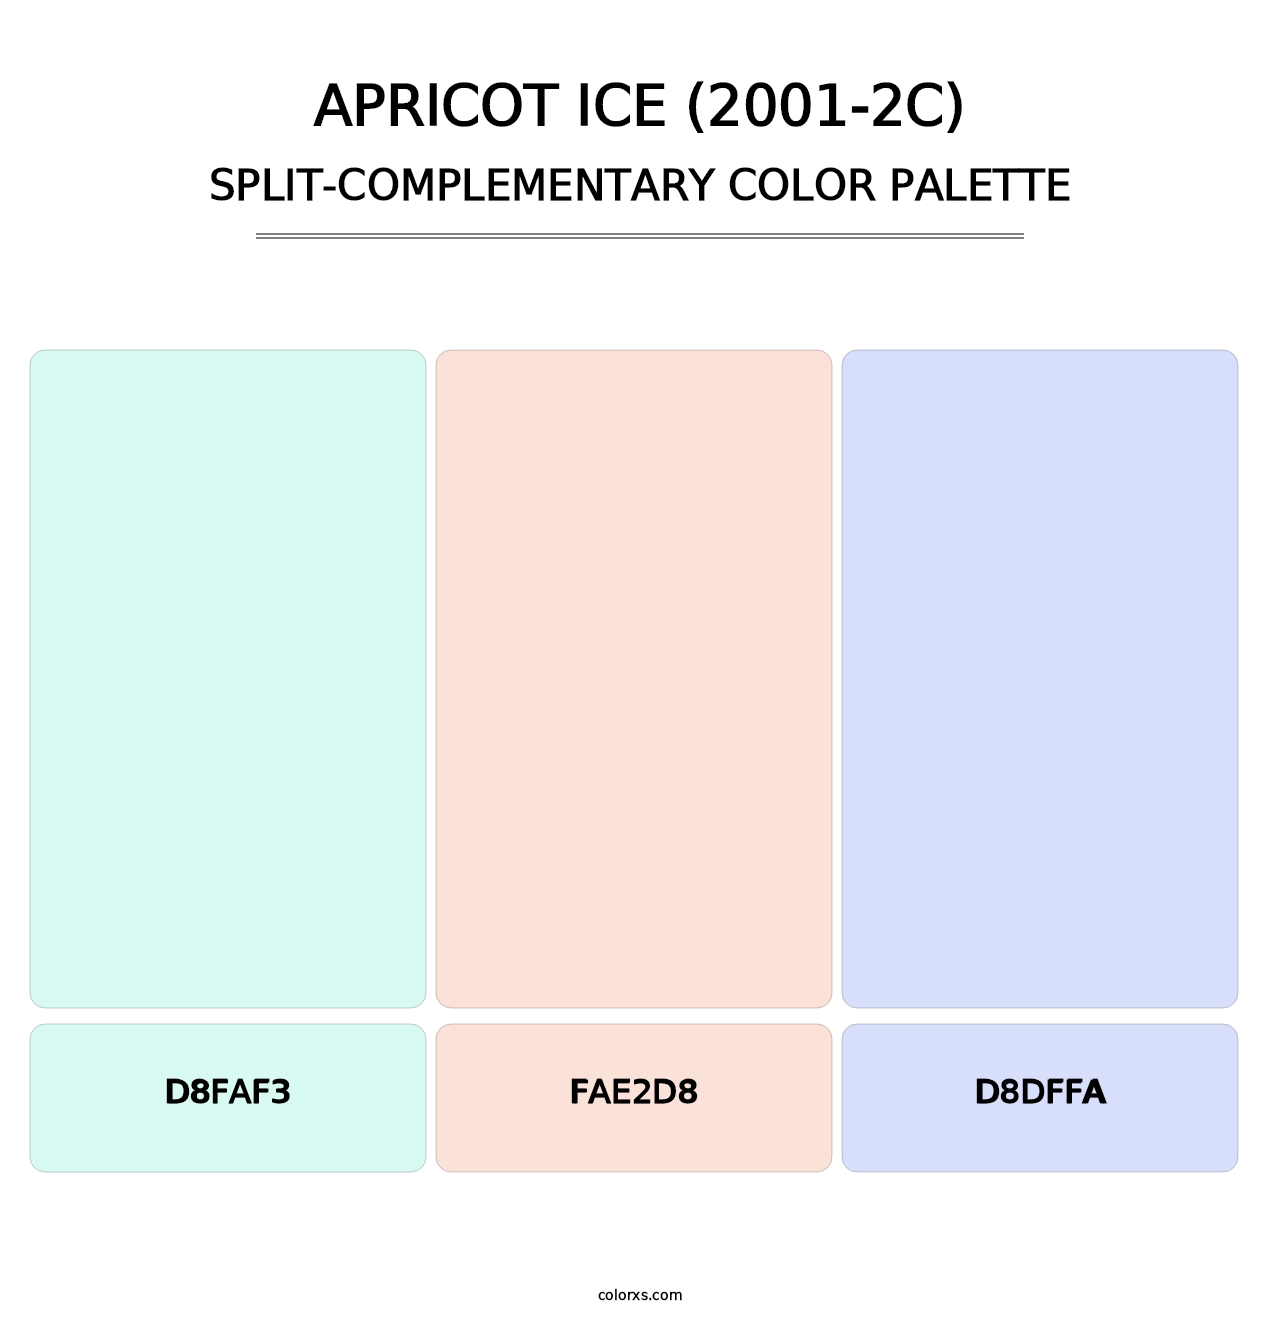 Apricot Ice (2001-2C) - Split-Complementary Color Palette